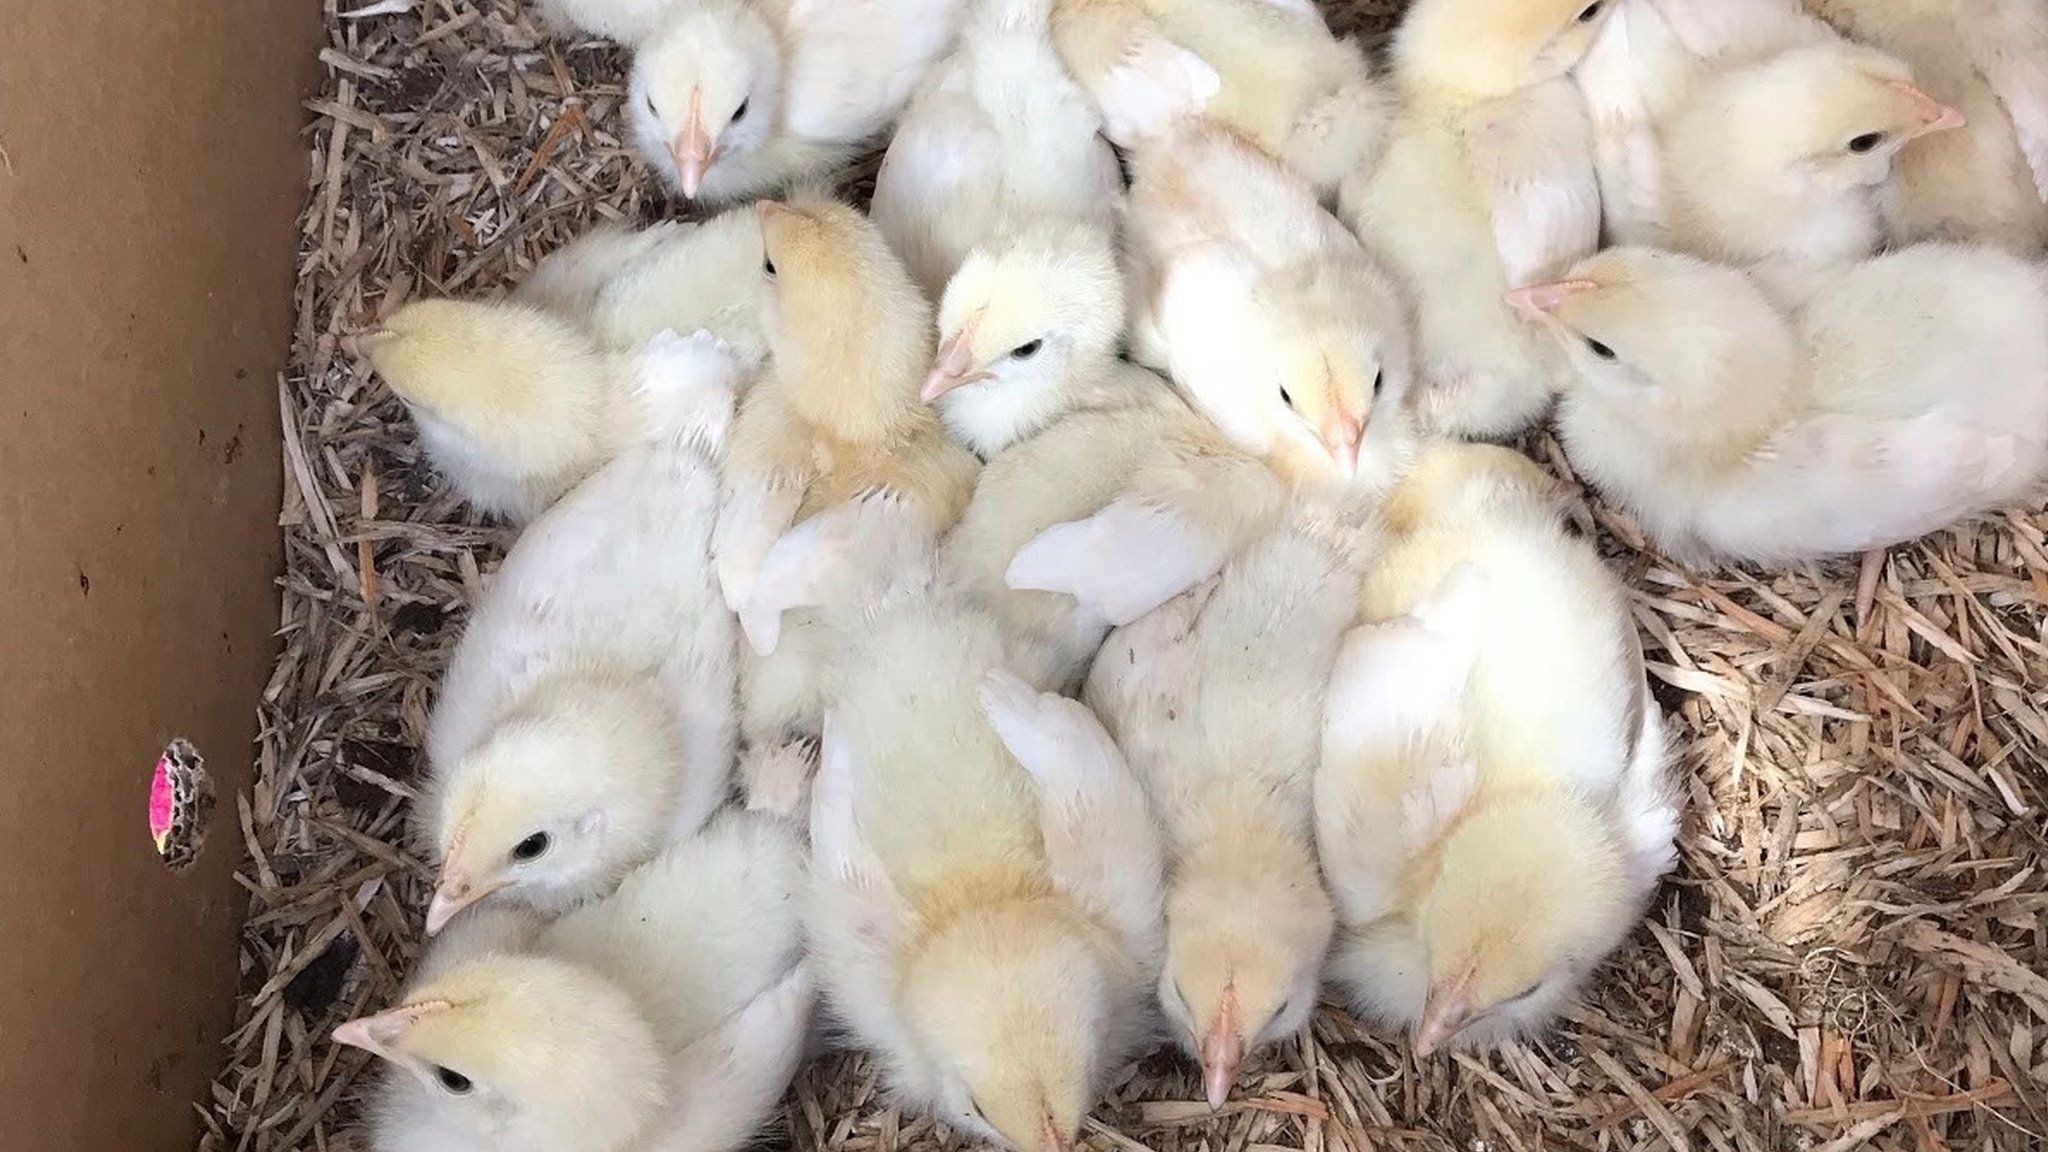 One of the batches of chicks